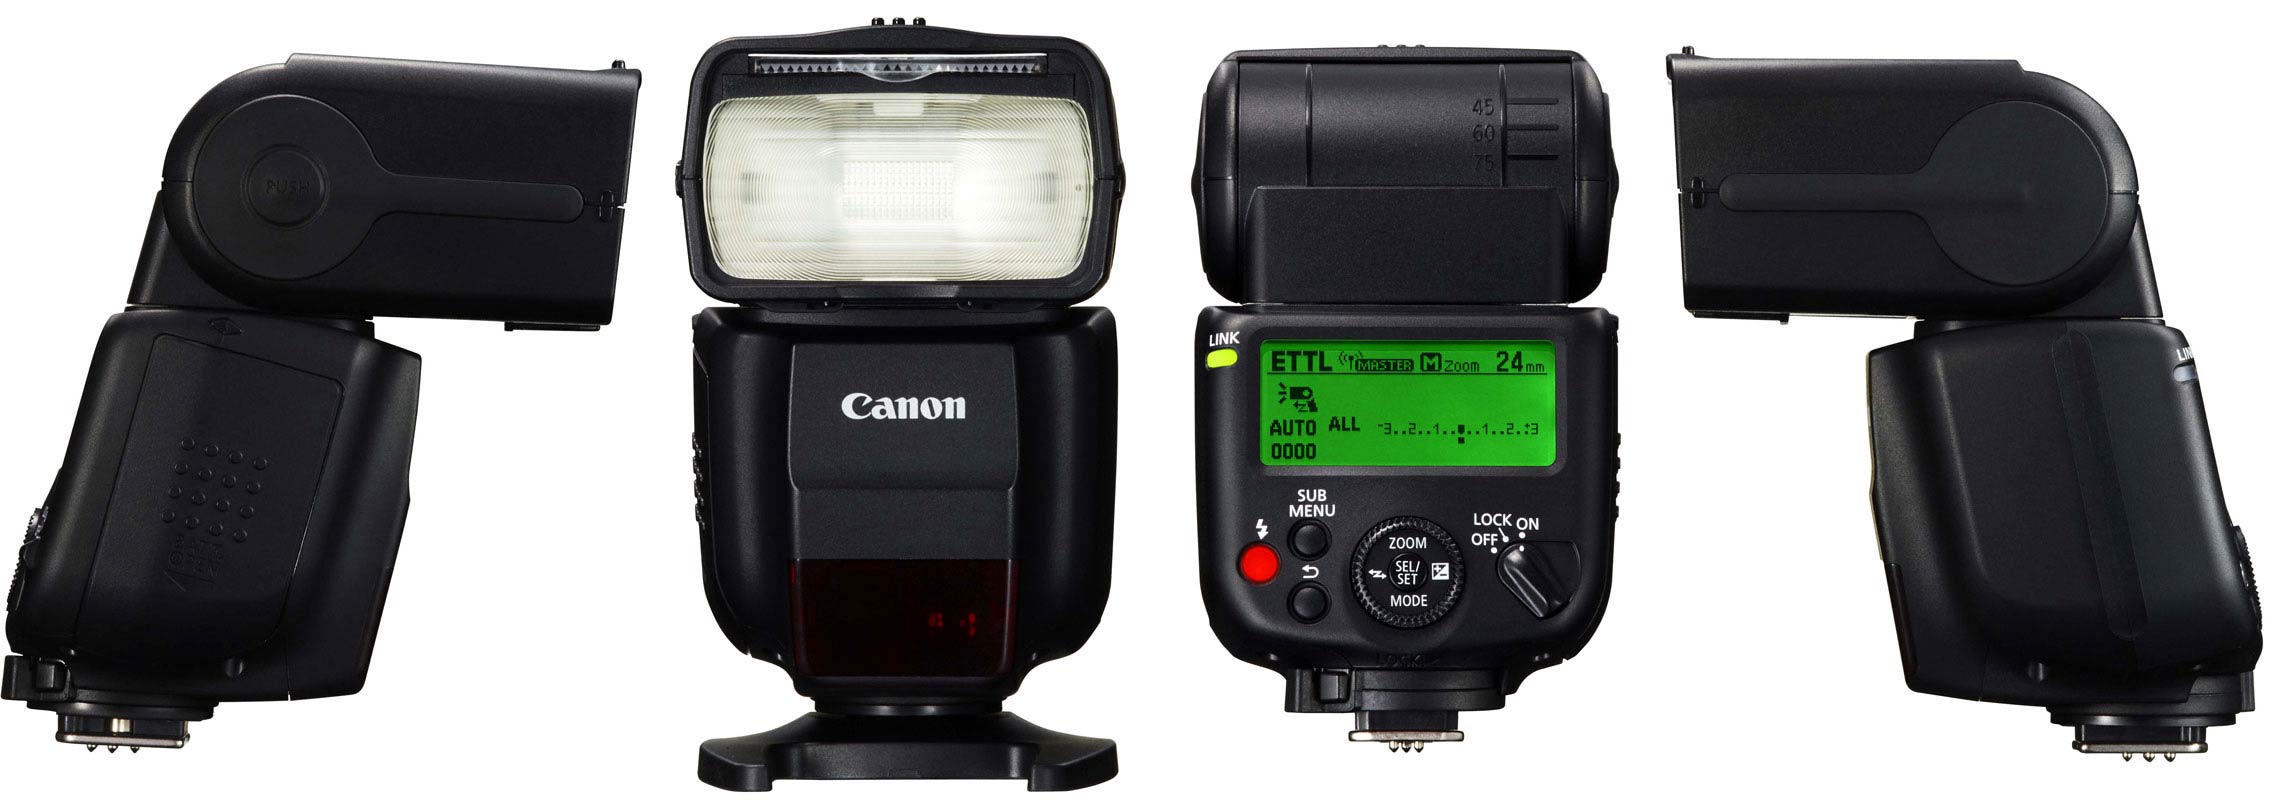 Canon Announces New 430-EX III RT Flash - Light And Matter